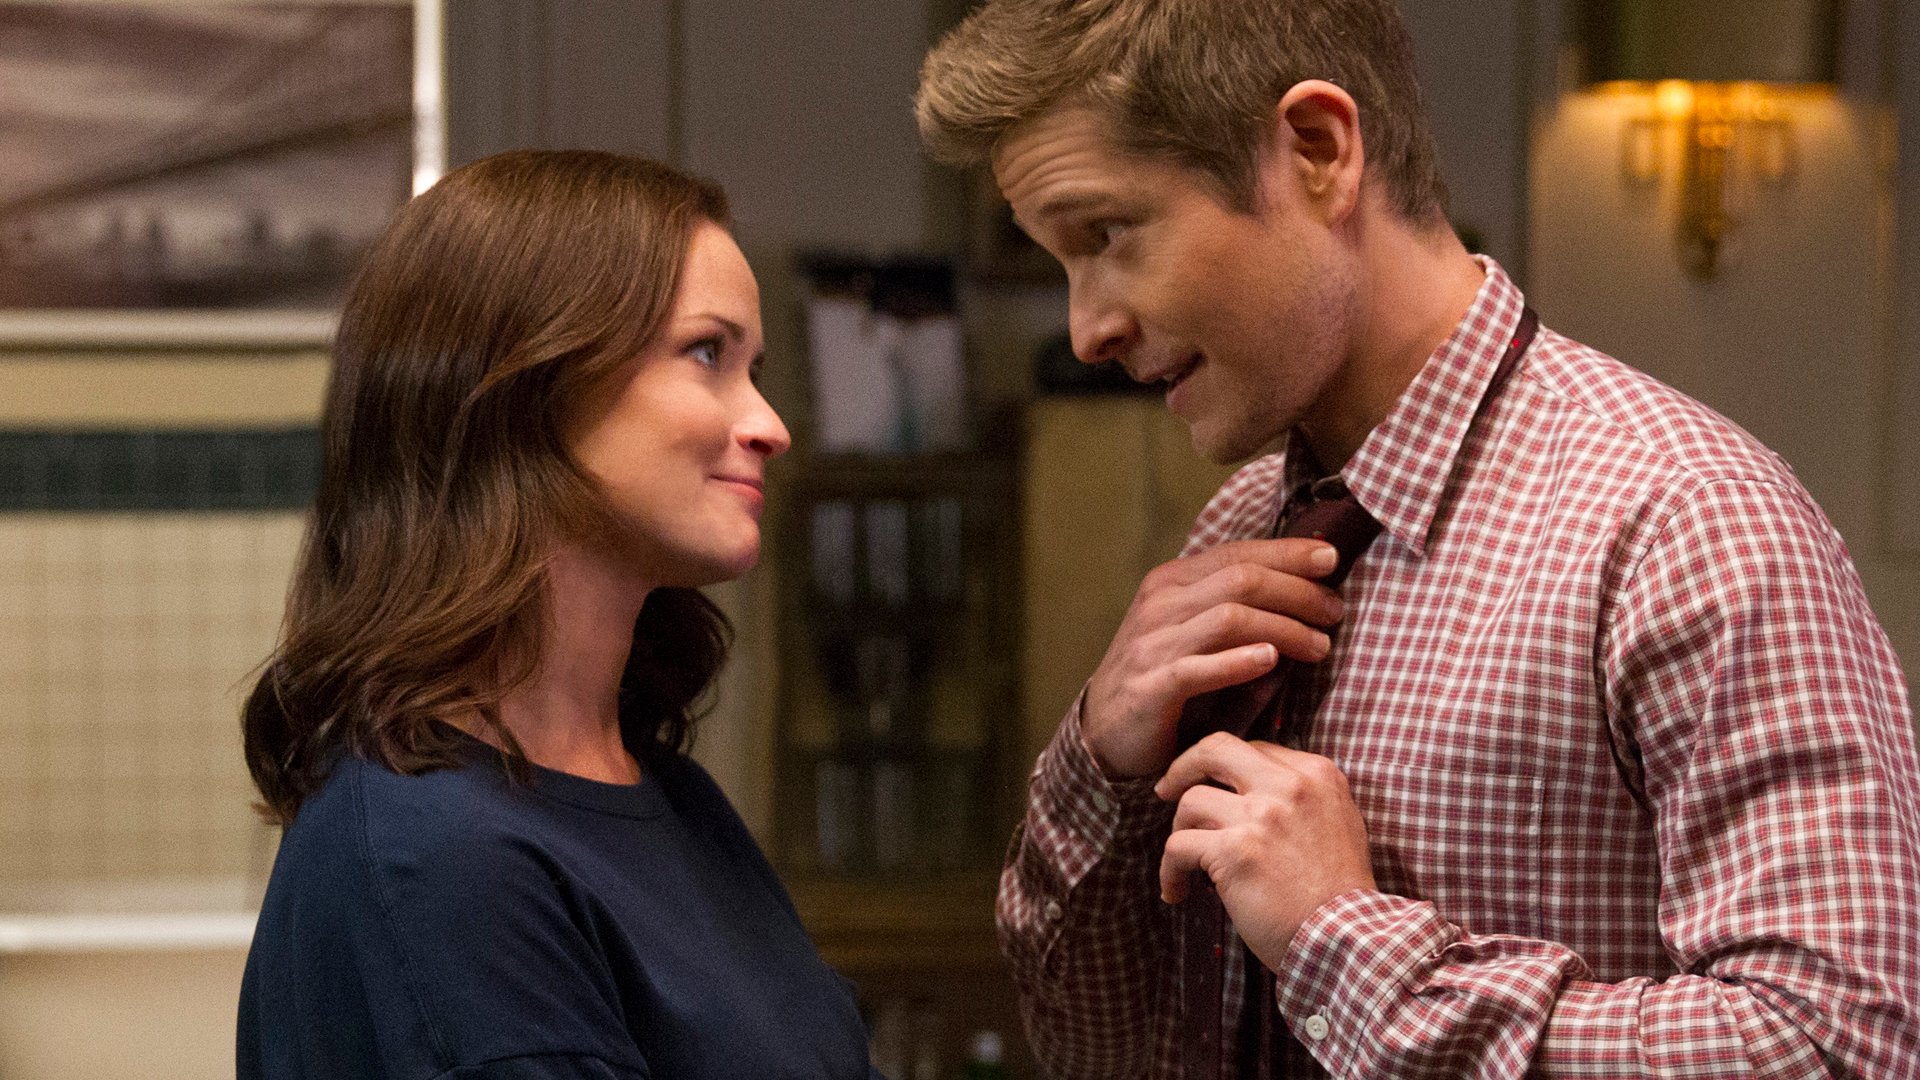 Alexis Bledel as Rory Gilmore and Matt Czuchry as Logan Huntzberger on 'Gilmore Girls: A Year in the Life'